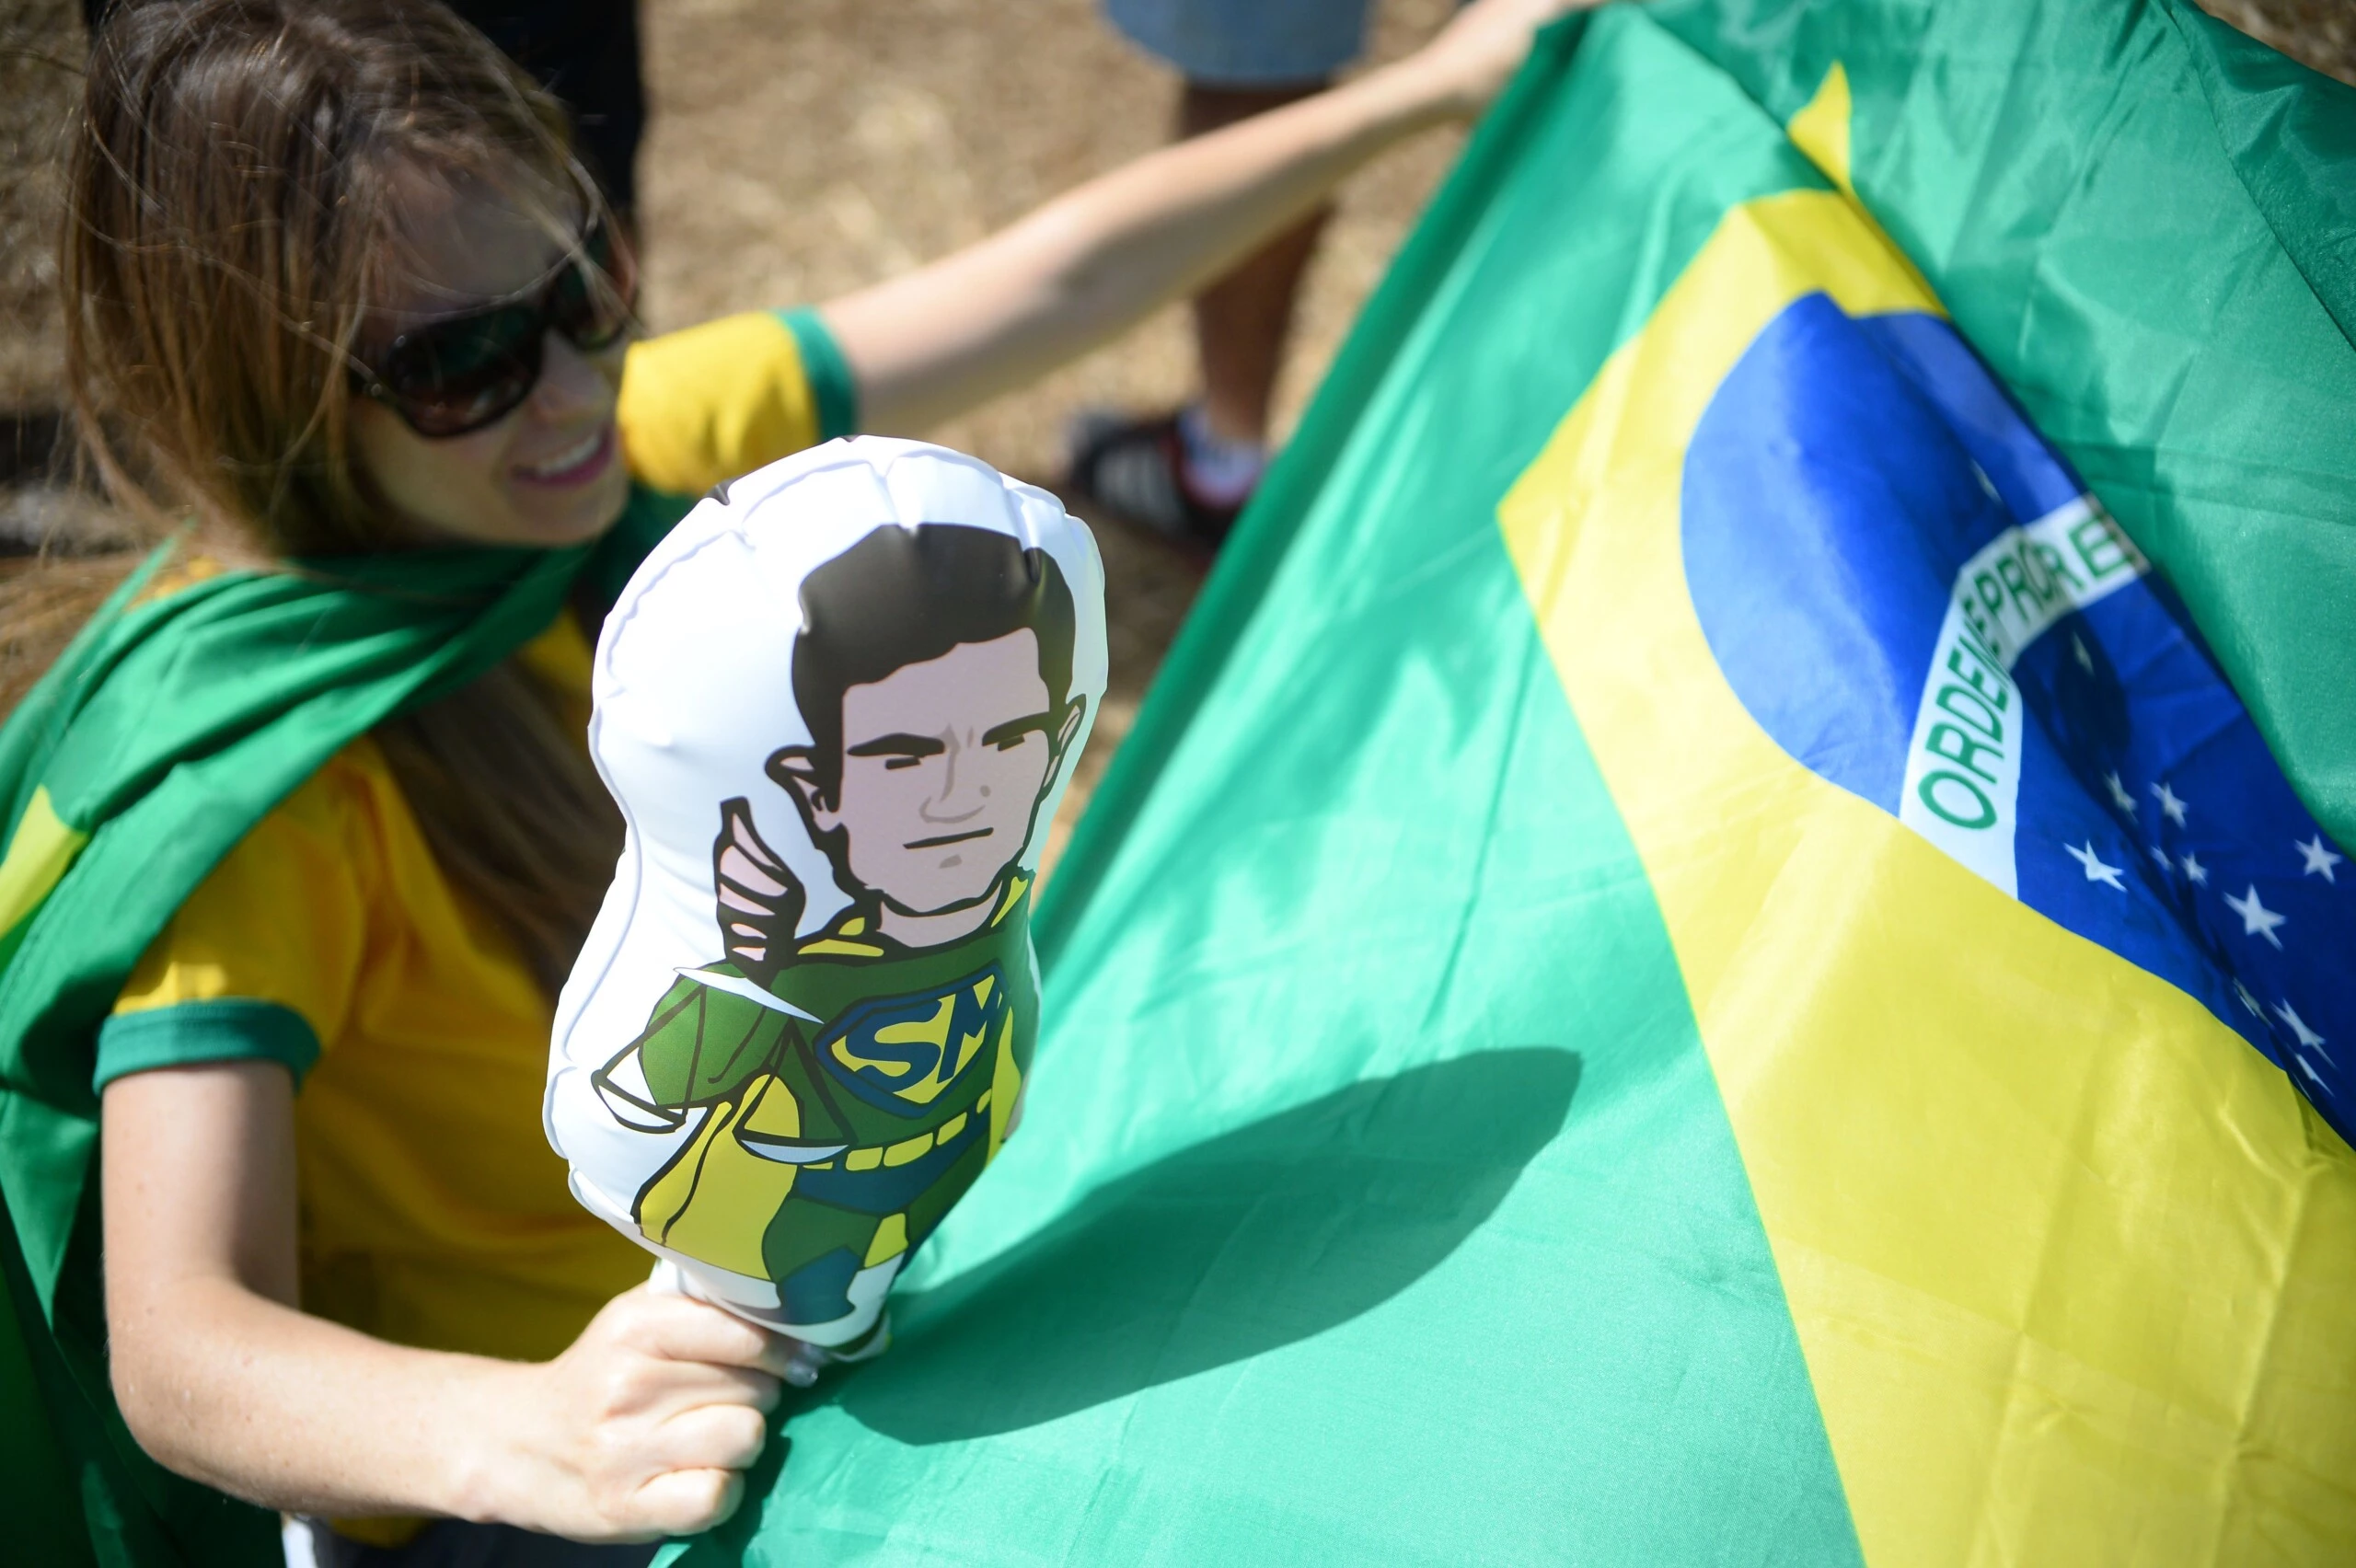 A woman holds an inflatable balloon depicting Brazilian judge Sergio Moro as a superhero, during a protest against suspended president Dilma Rousseff outside the National Congress in Brasilia, on July 31, 2016.Protesters took to the streets of Brazil on Sunday to demand the final leaving of suspended President Dilma Rousseff or to defend her continuance, just five days before the start of the Rio 2016 Olympic Games. / AFP / ANDRESSA ANHOLETE        (Photo credit should read ANDRESSA ANHOLETE/AFP/Getty Images)